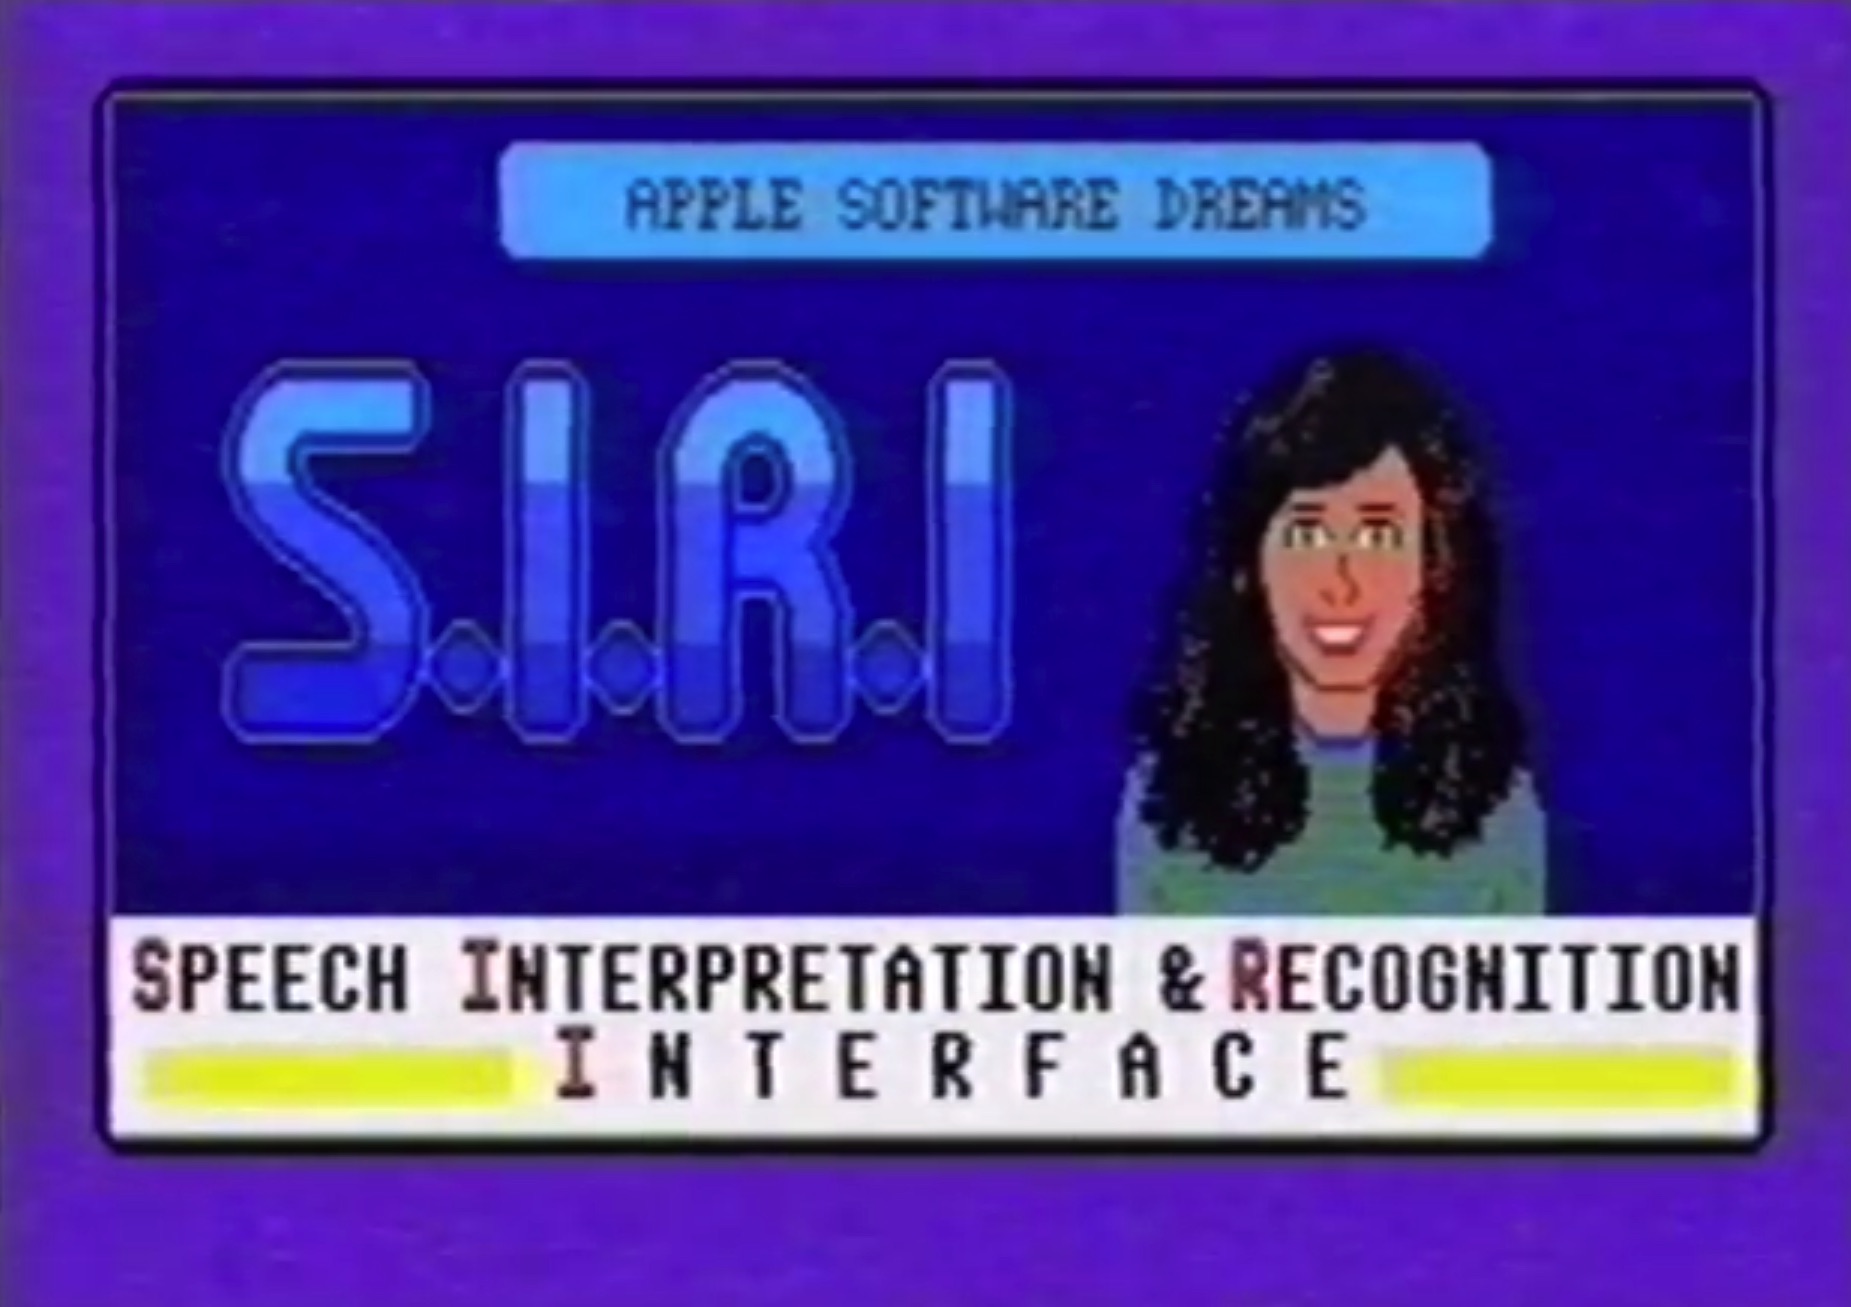 Humor moment: what would Siri be like in the 1980s?